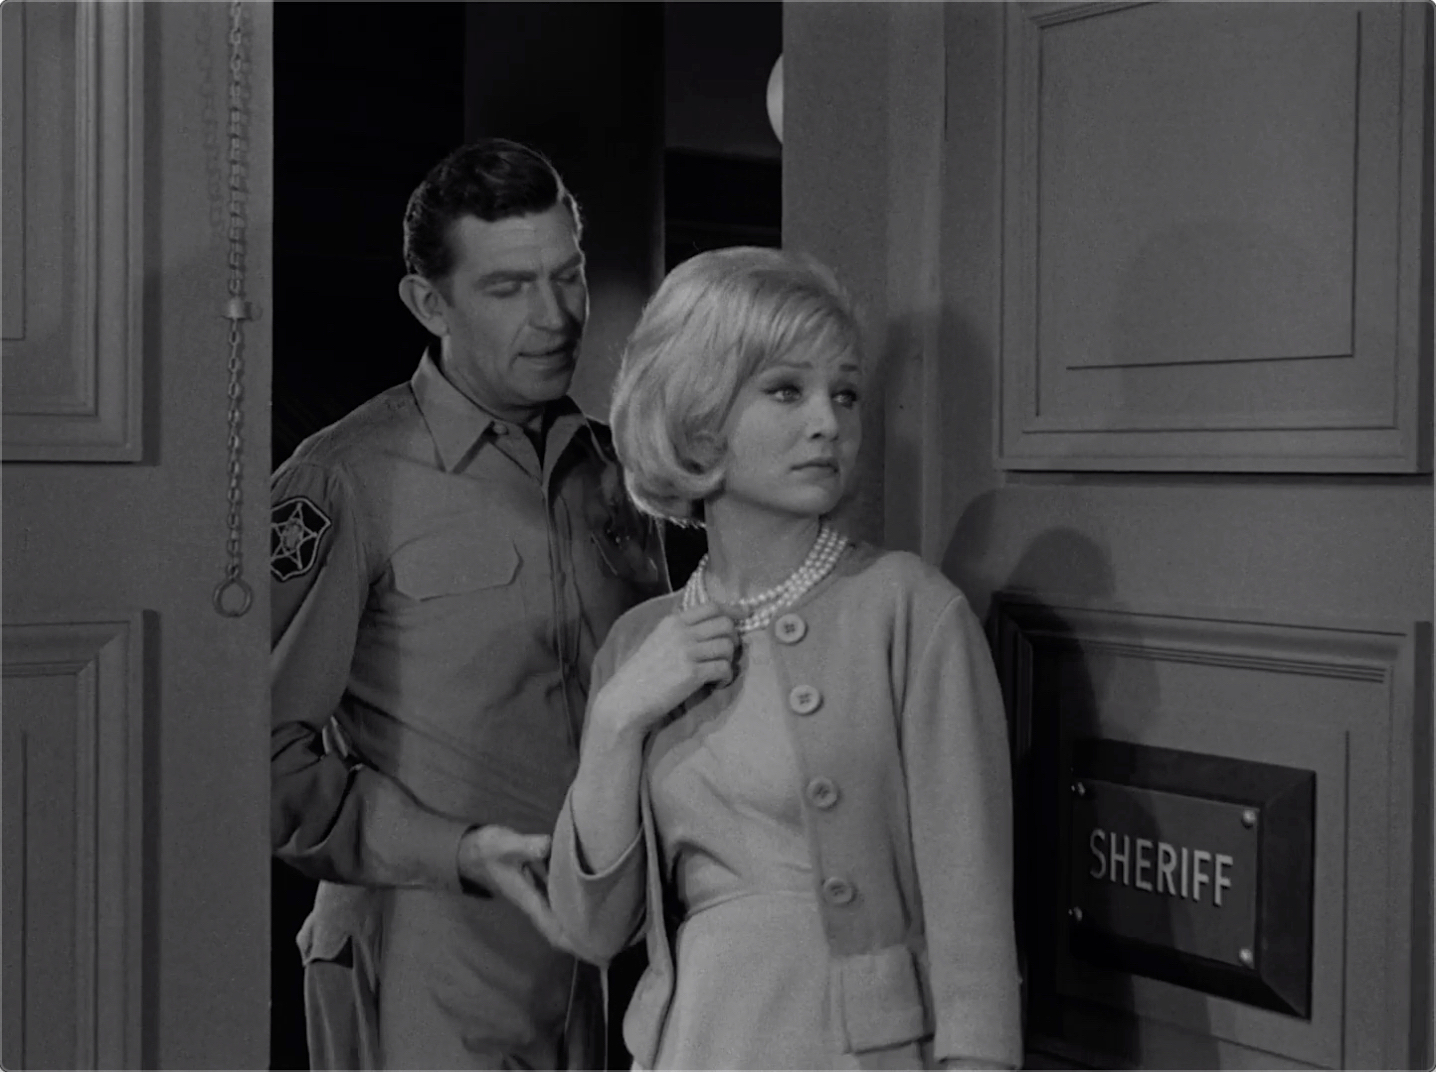 the-andy-griffith-show-s04e18-prisoner-of-love-feb-10-1964-168-jpg.185838